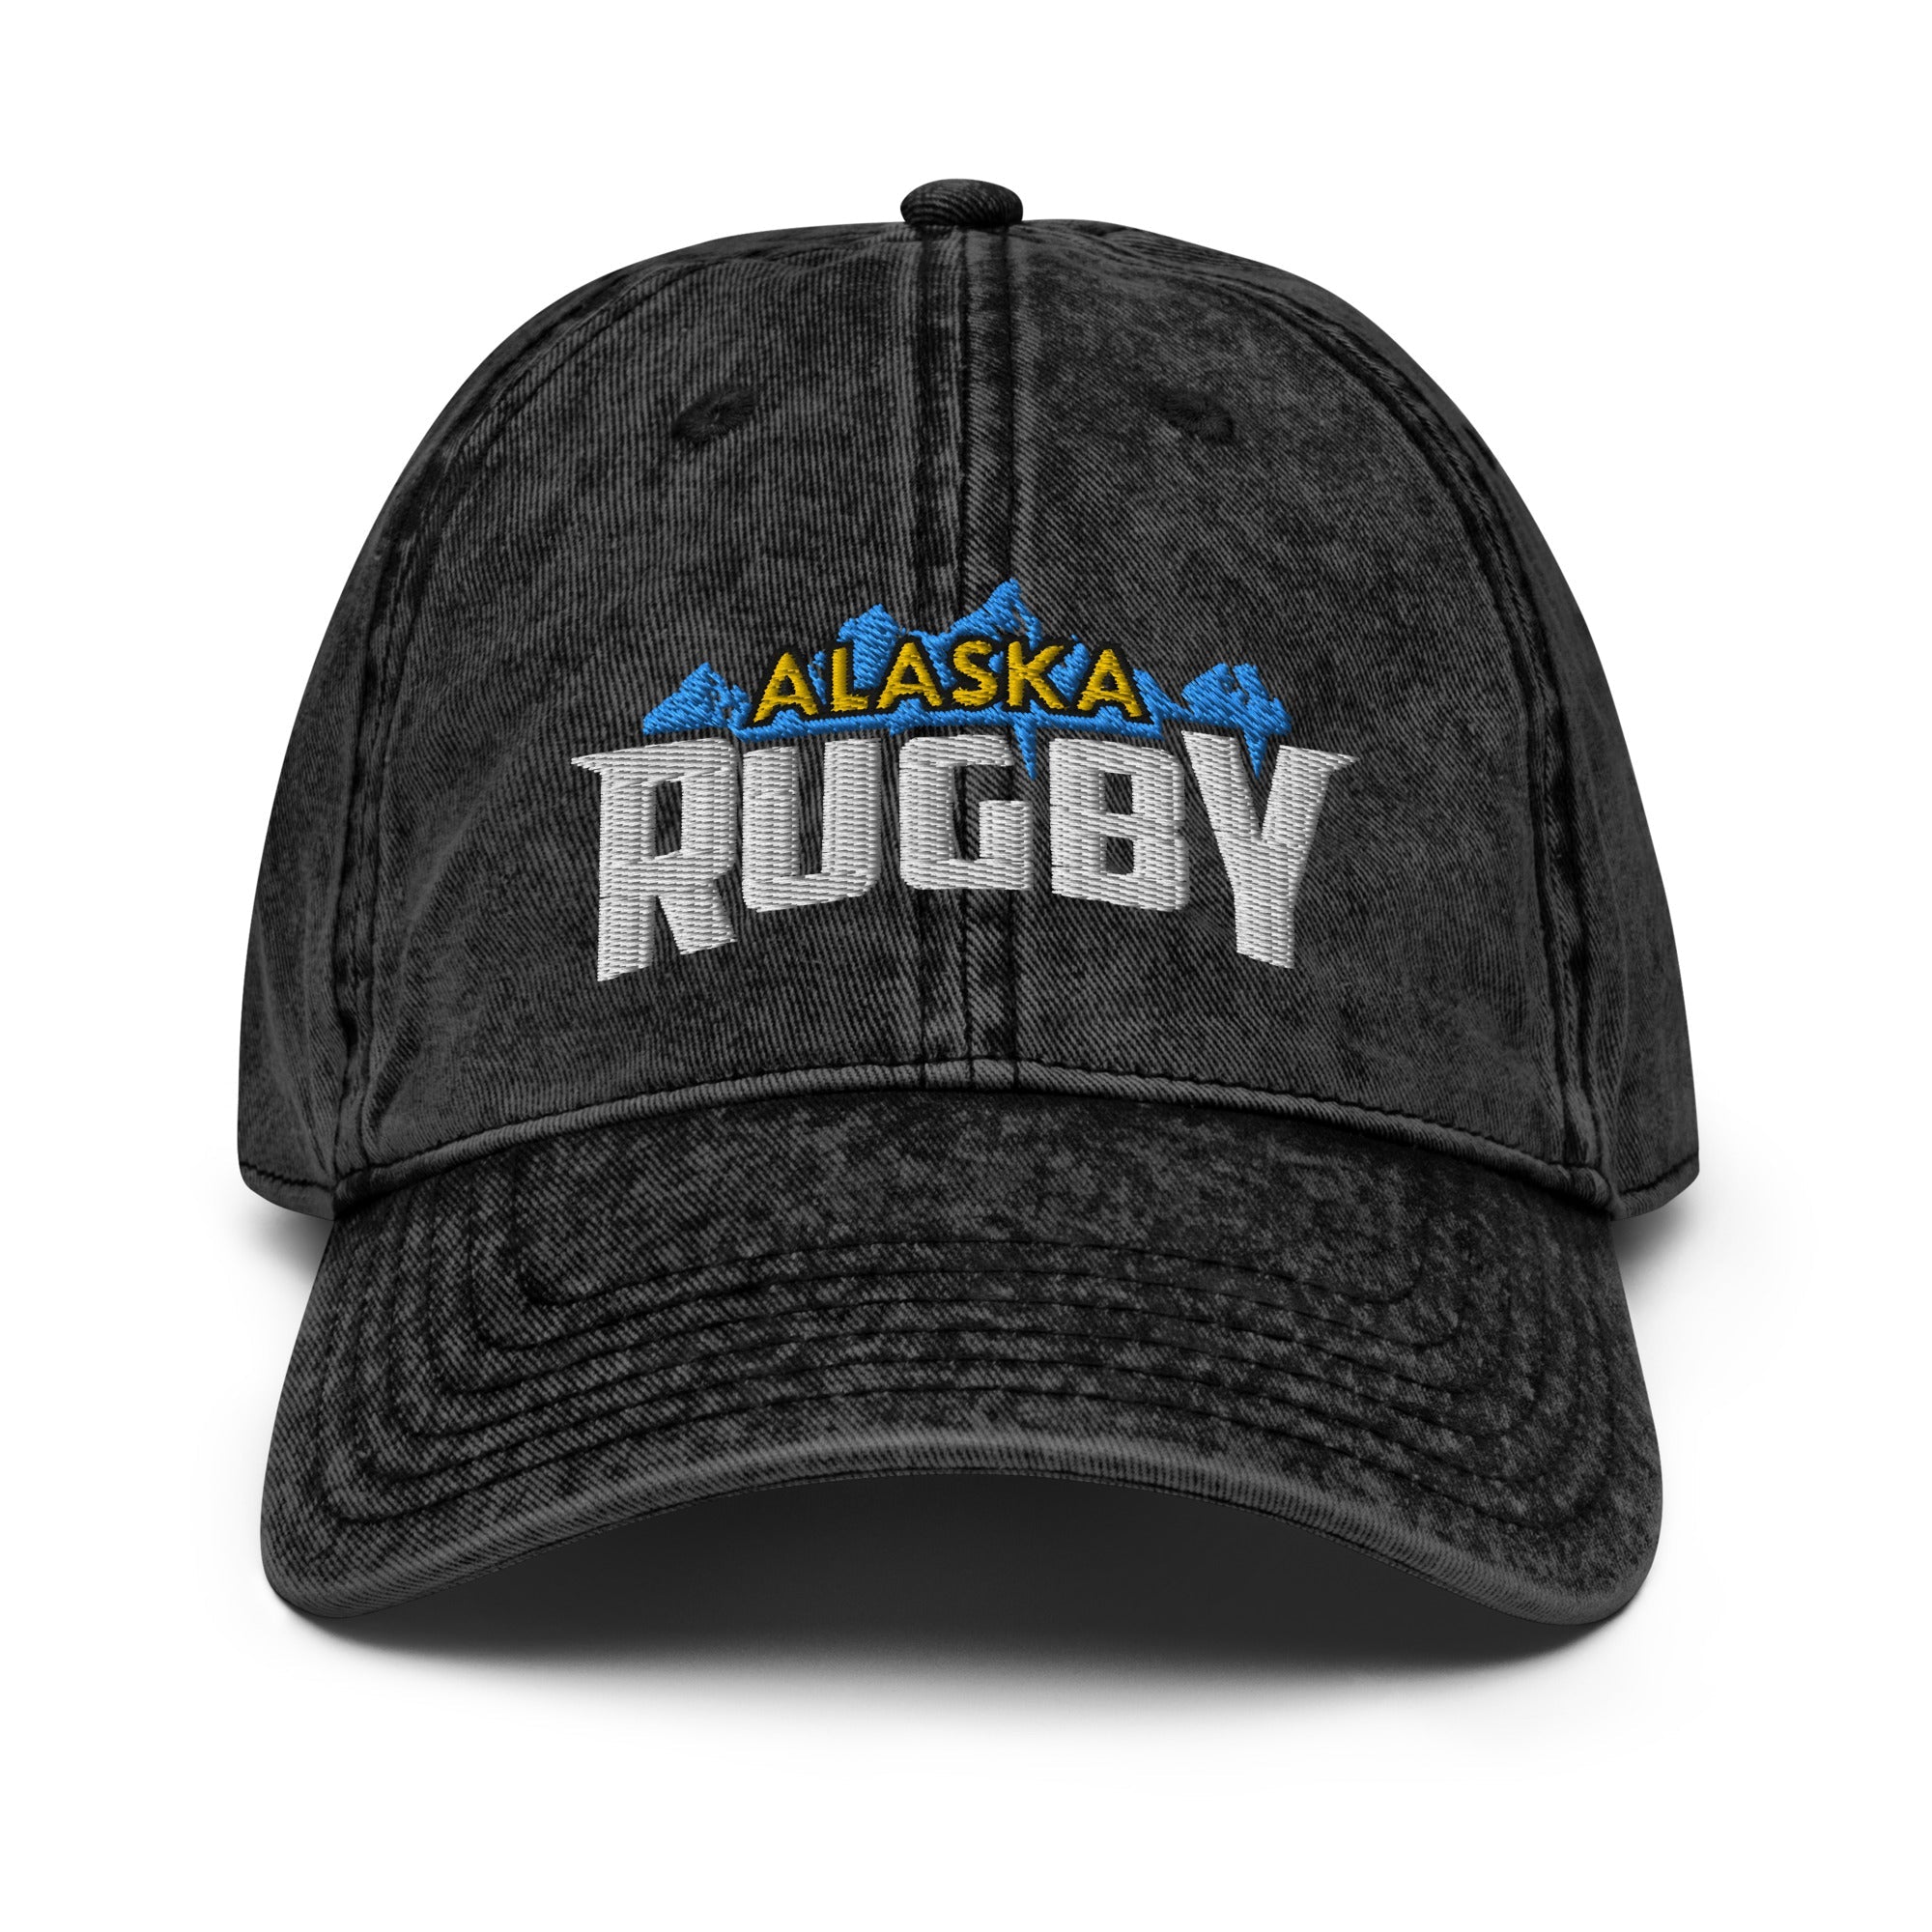 Rugby Imports Alaska Rugby Vintage Twill Cap